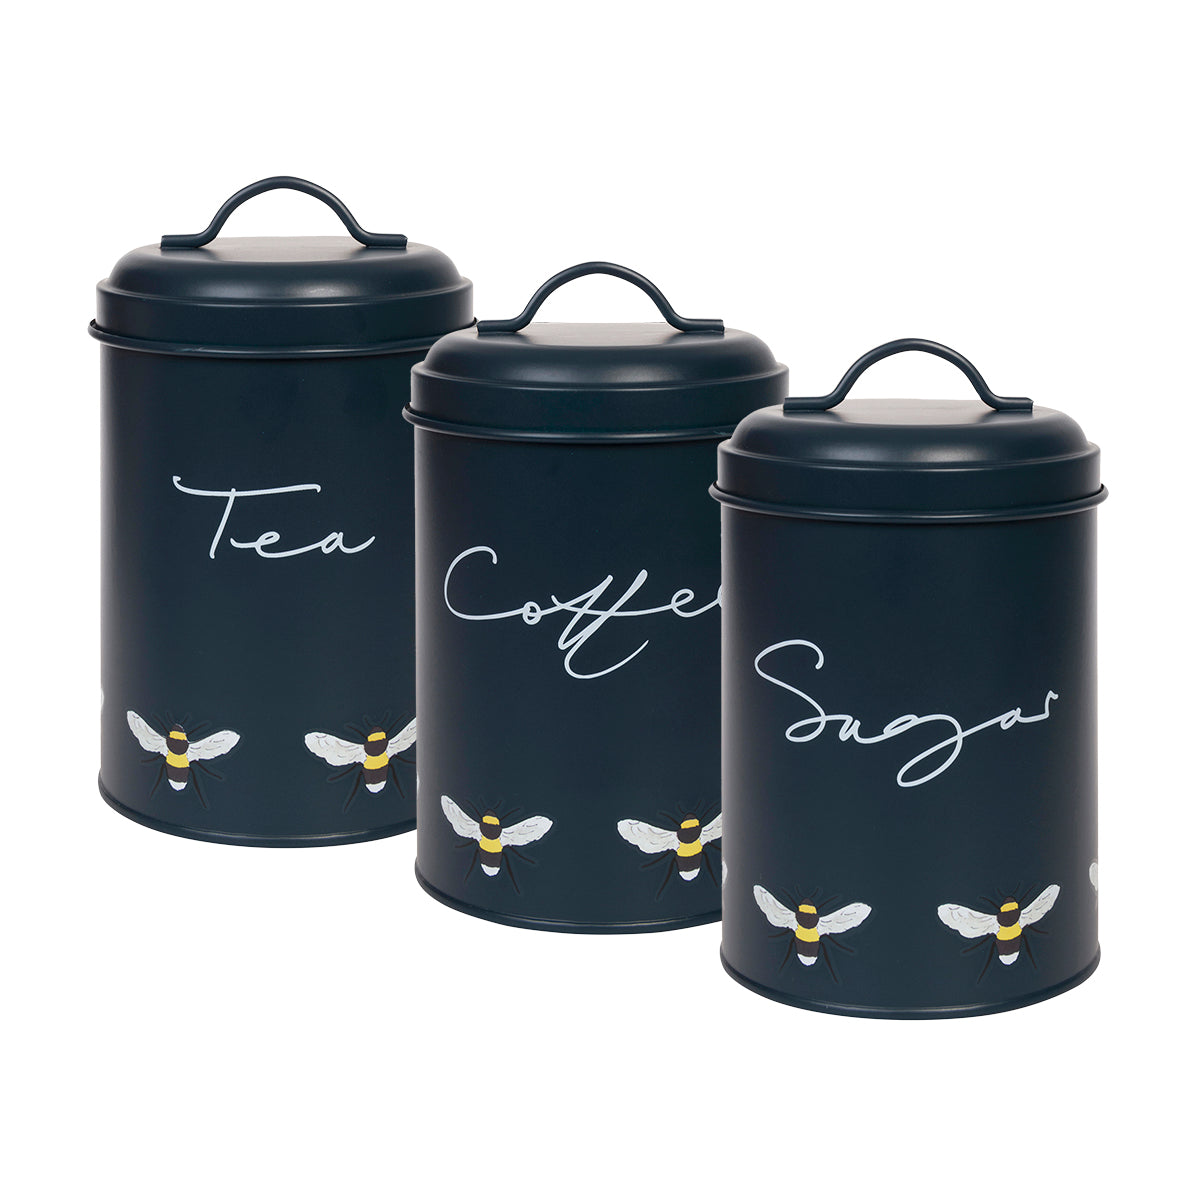 A set of three Sophie Allport storage tins for tea, coffee and sugar. Made from galvanised steel with a navy background.